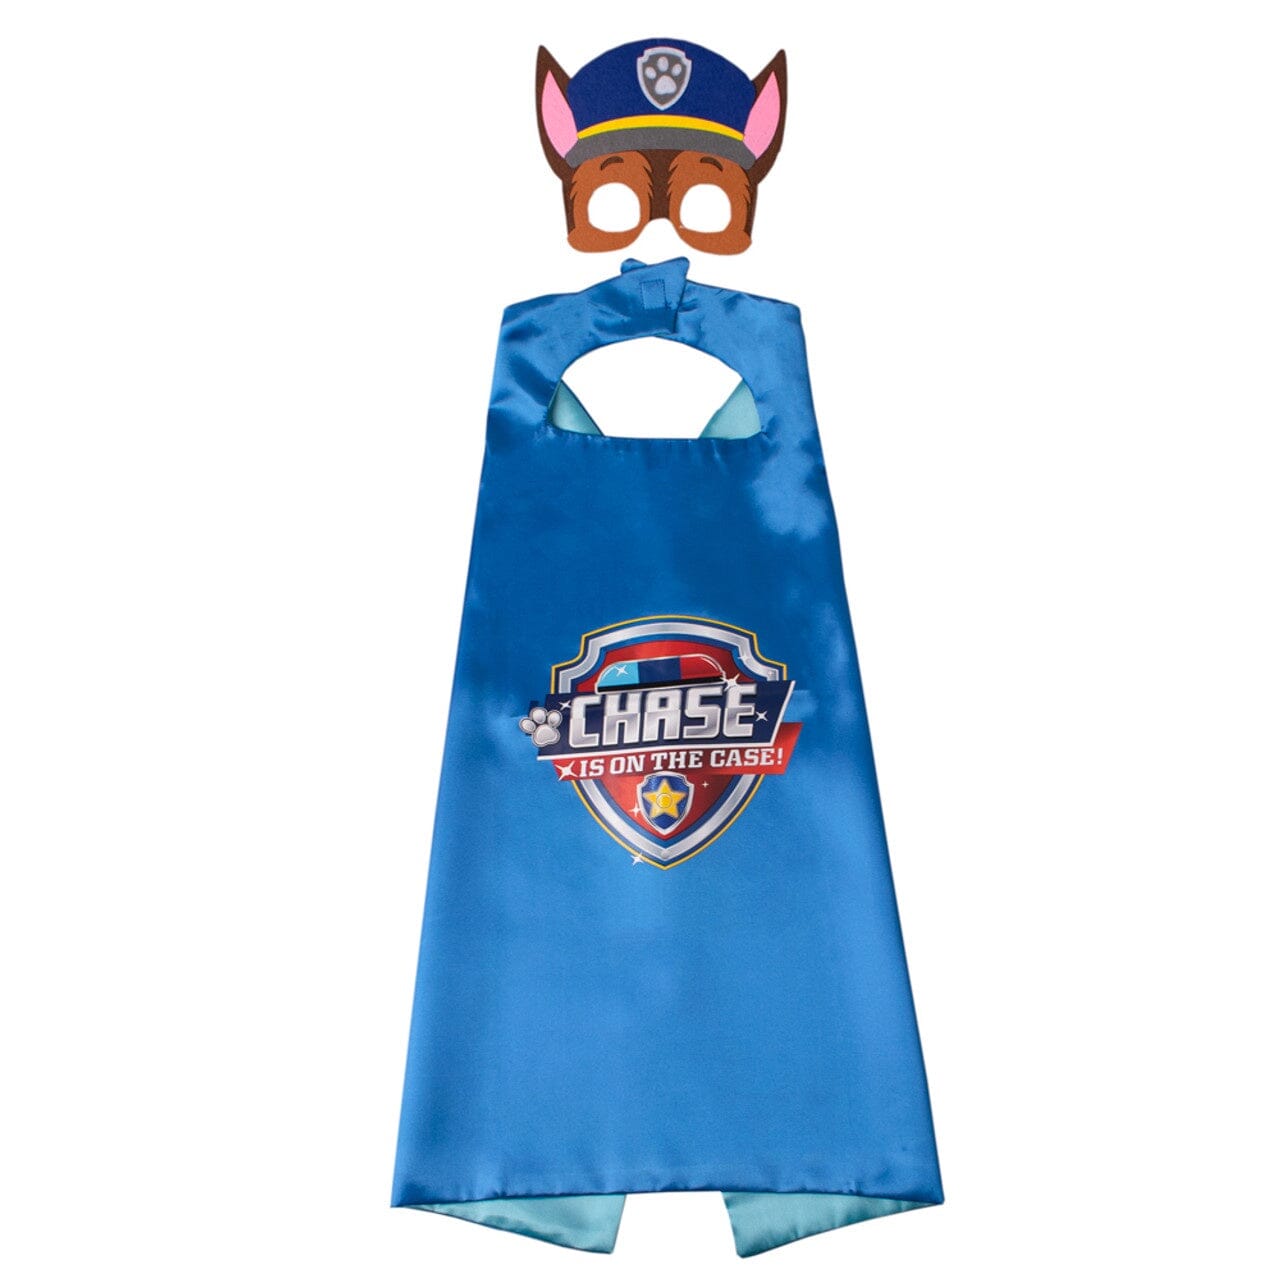 Paw Patrol Cape and Mask Set - Chase (Blue) Dress Up Not specified 